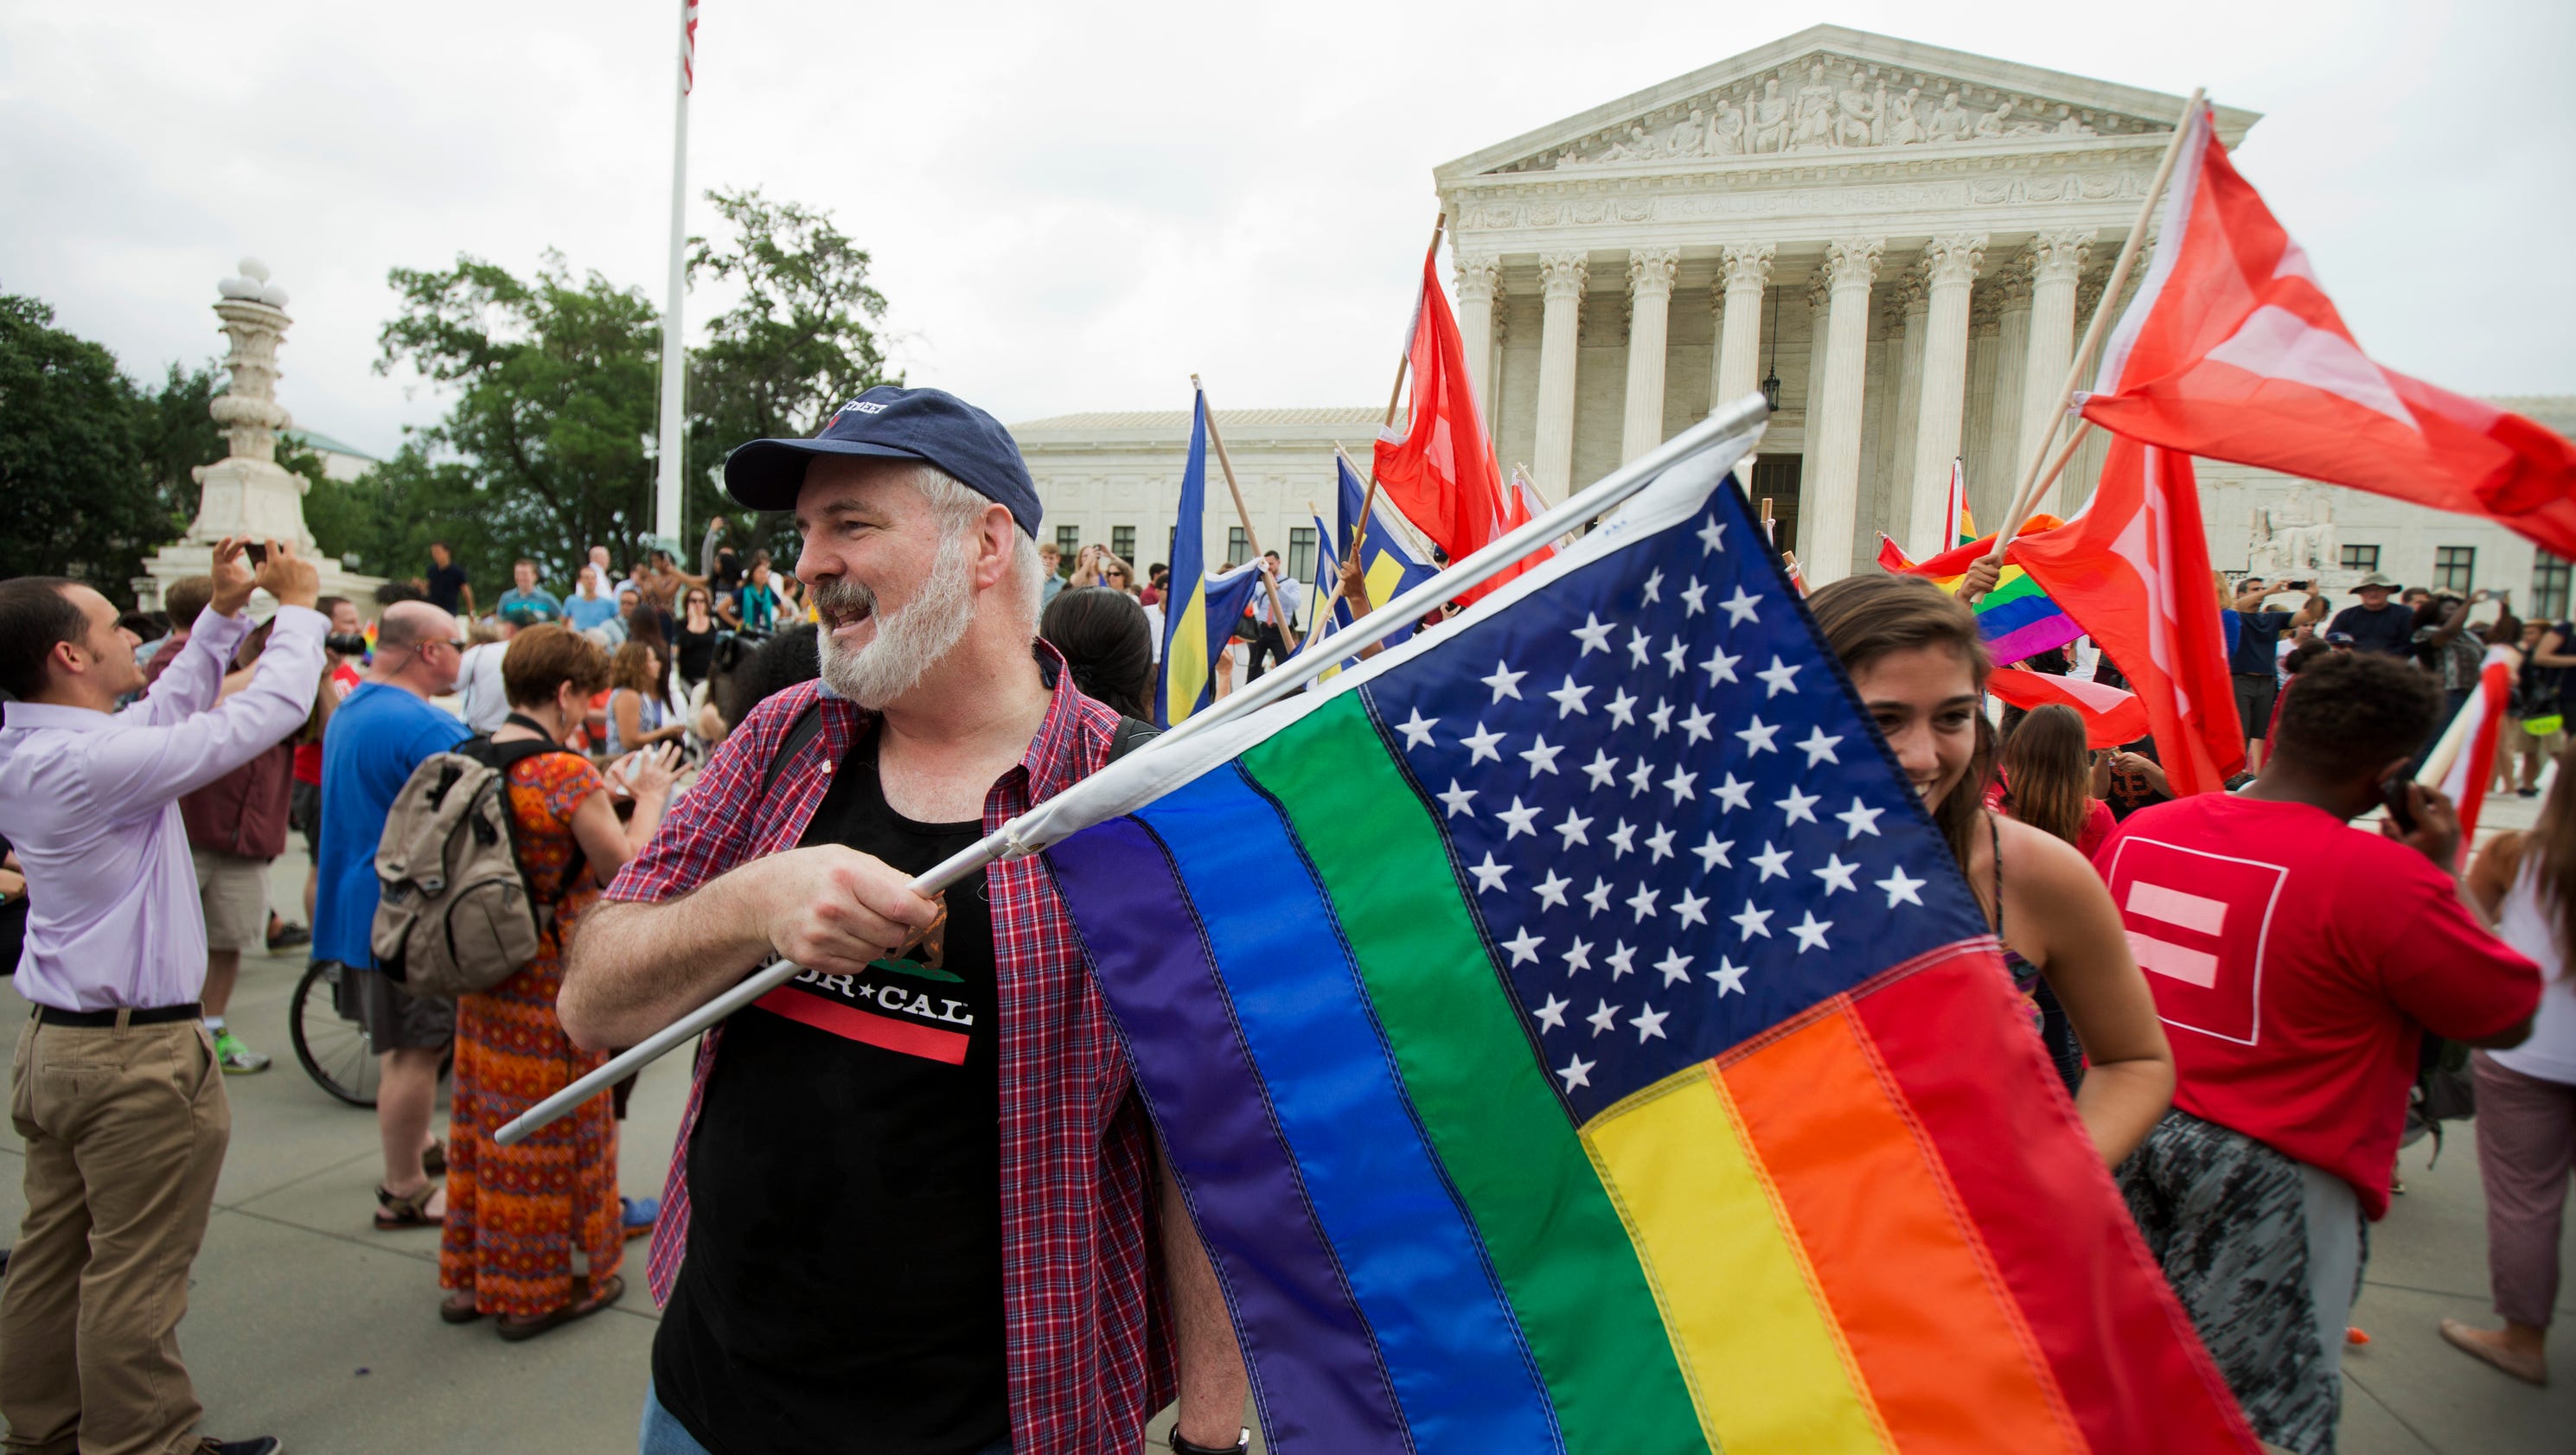 Poll Shows Most Say Court Decisions Mean Obamacare Gay Marriage Settled 